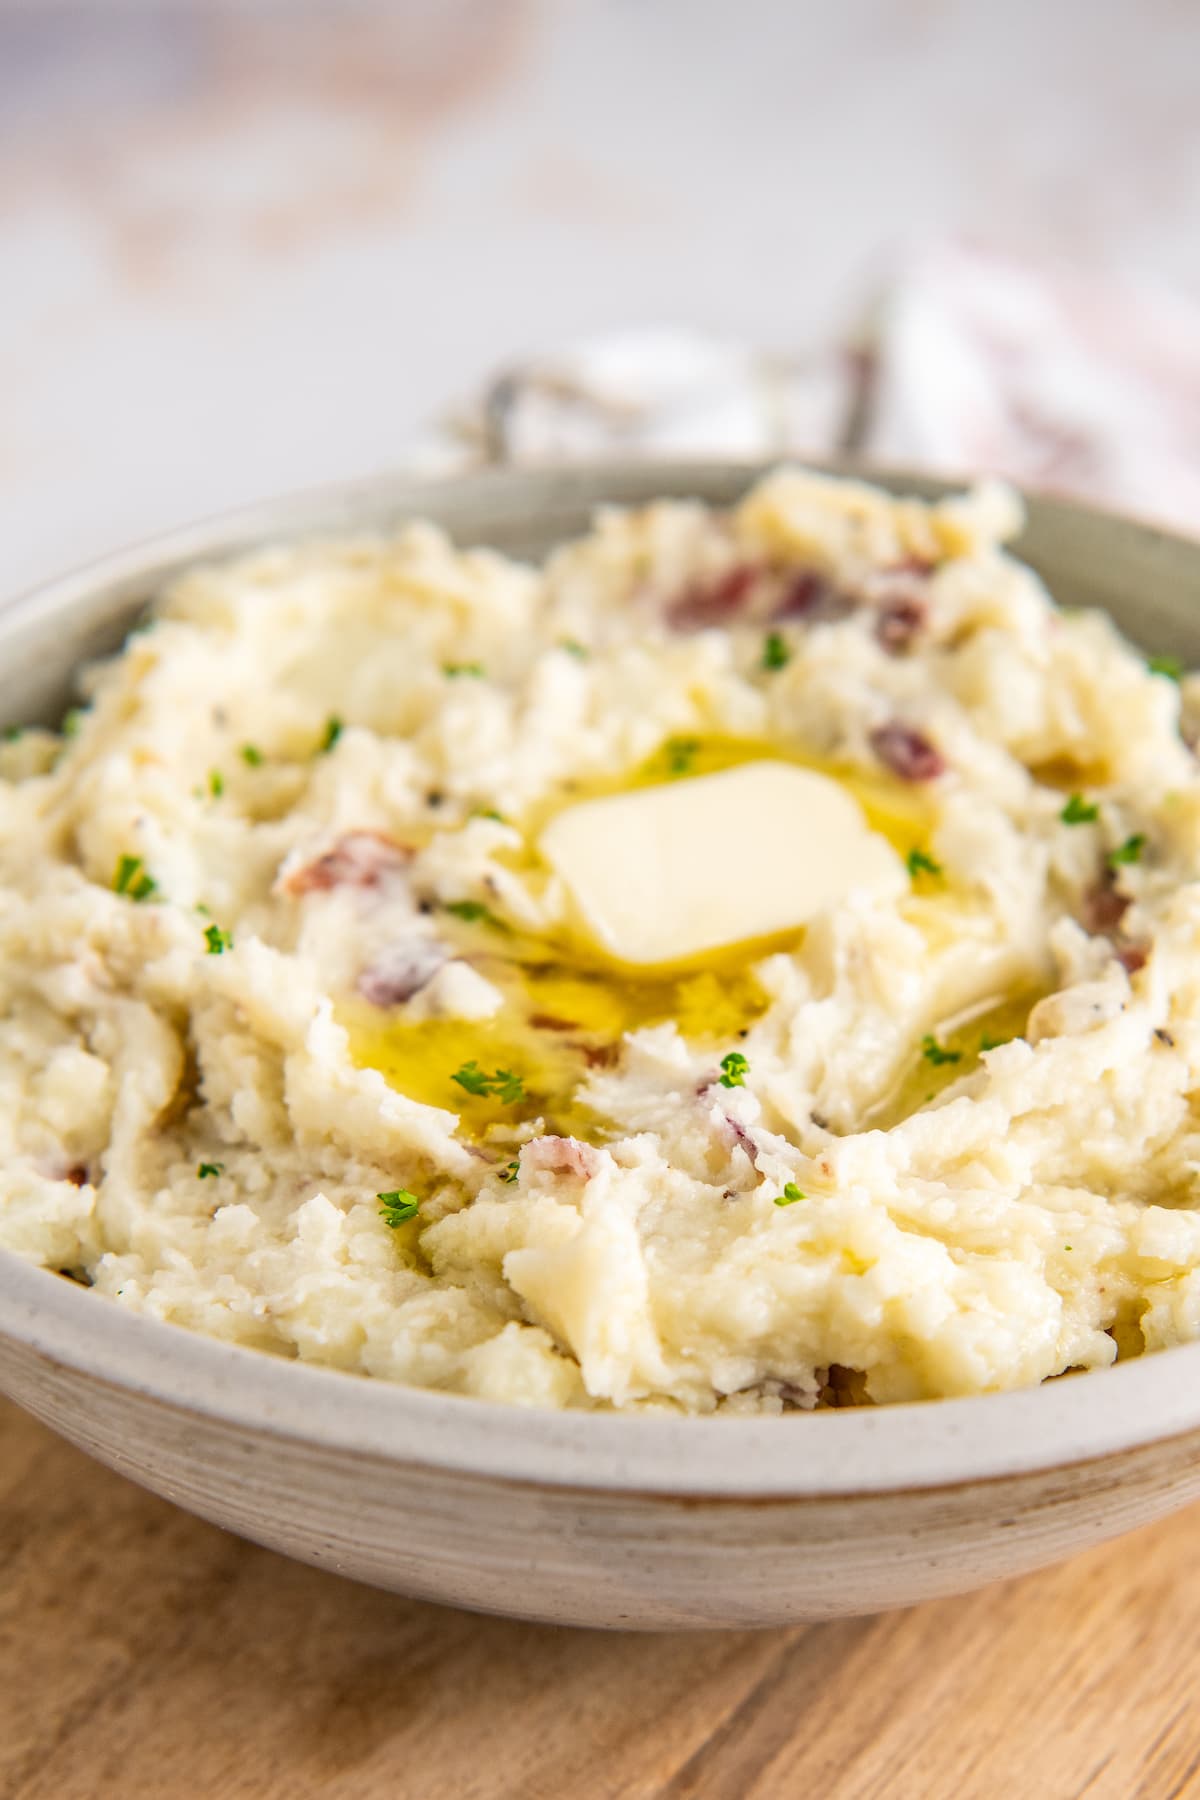 A bowl of creamy mashed potatoes is topped with a pat of melting butter.